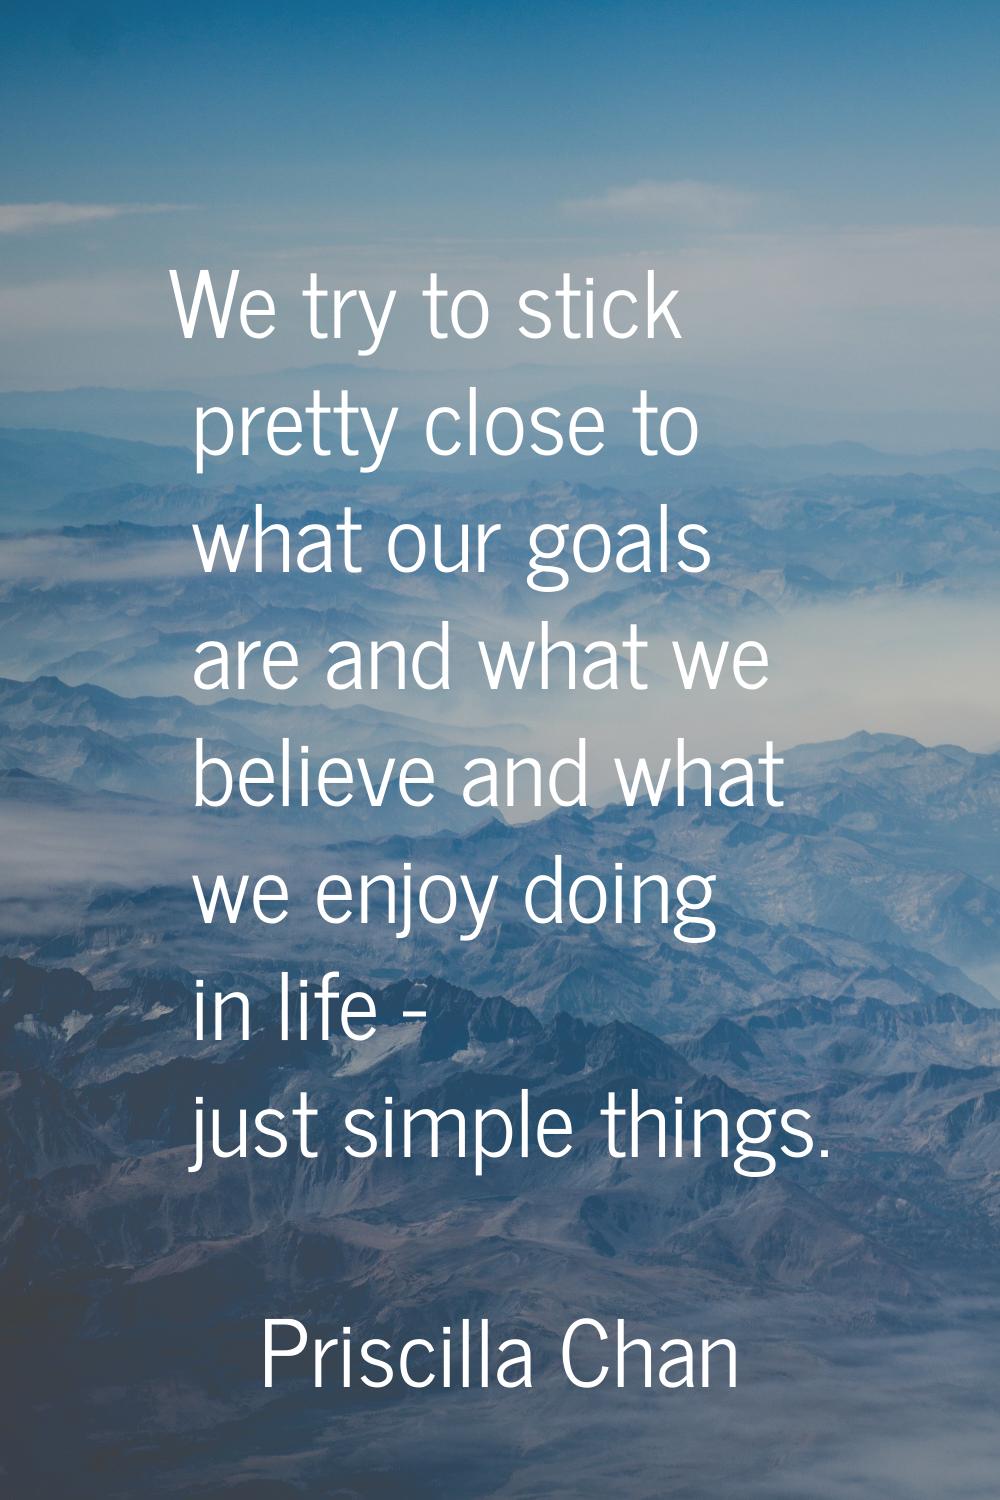 We try to stick pretty close to what our goals are and what we believe and what we enjoy doing in l